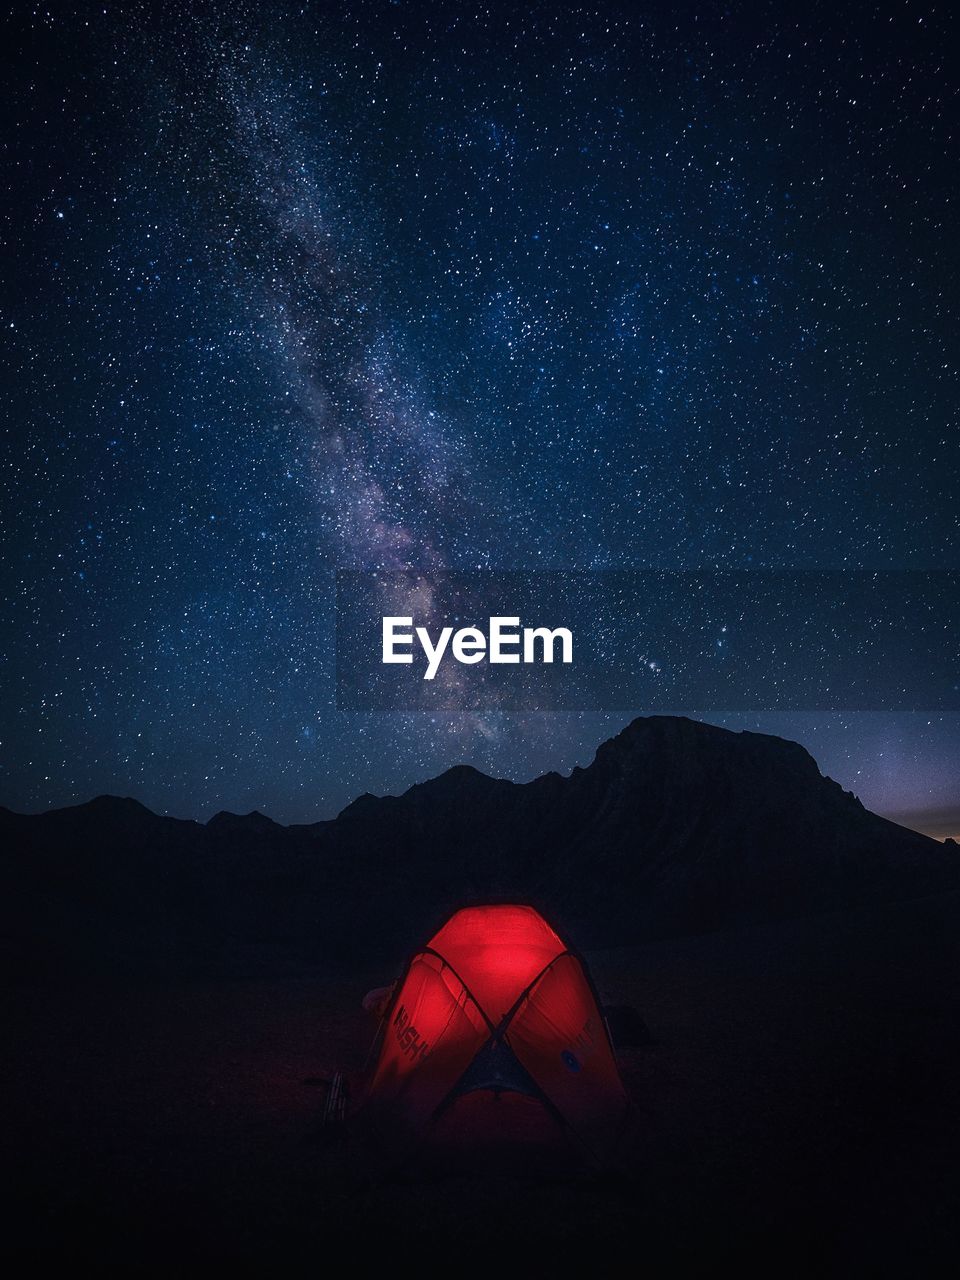 Illuminated tent on mountains against star field in sky at night